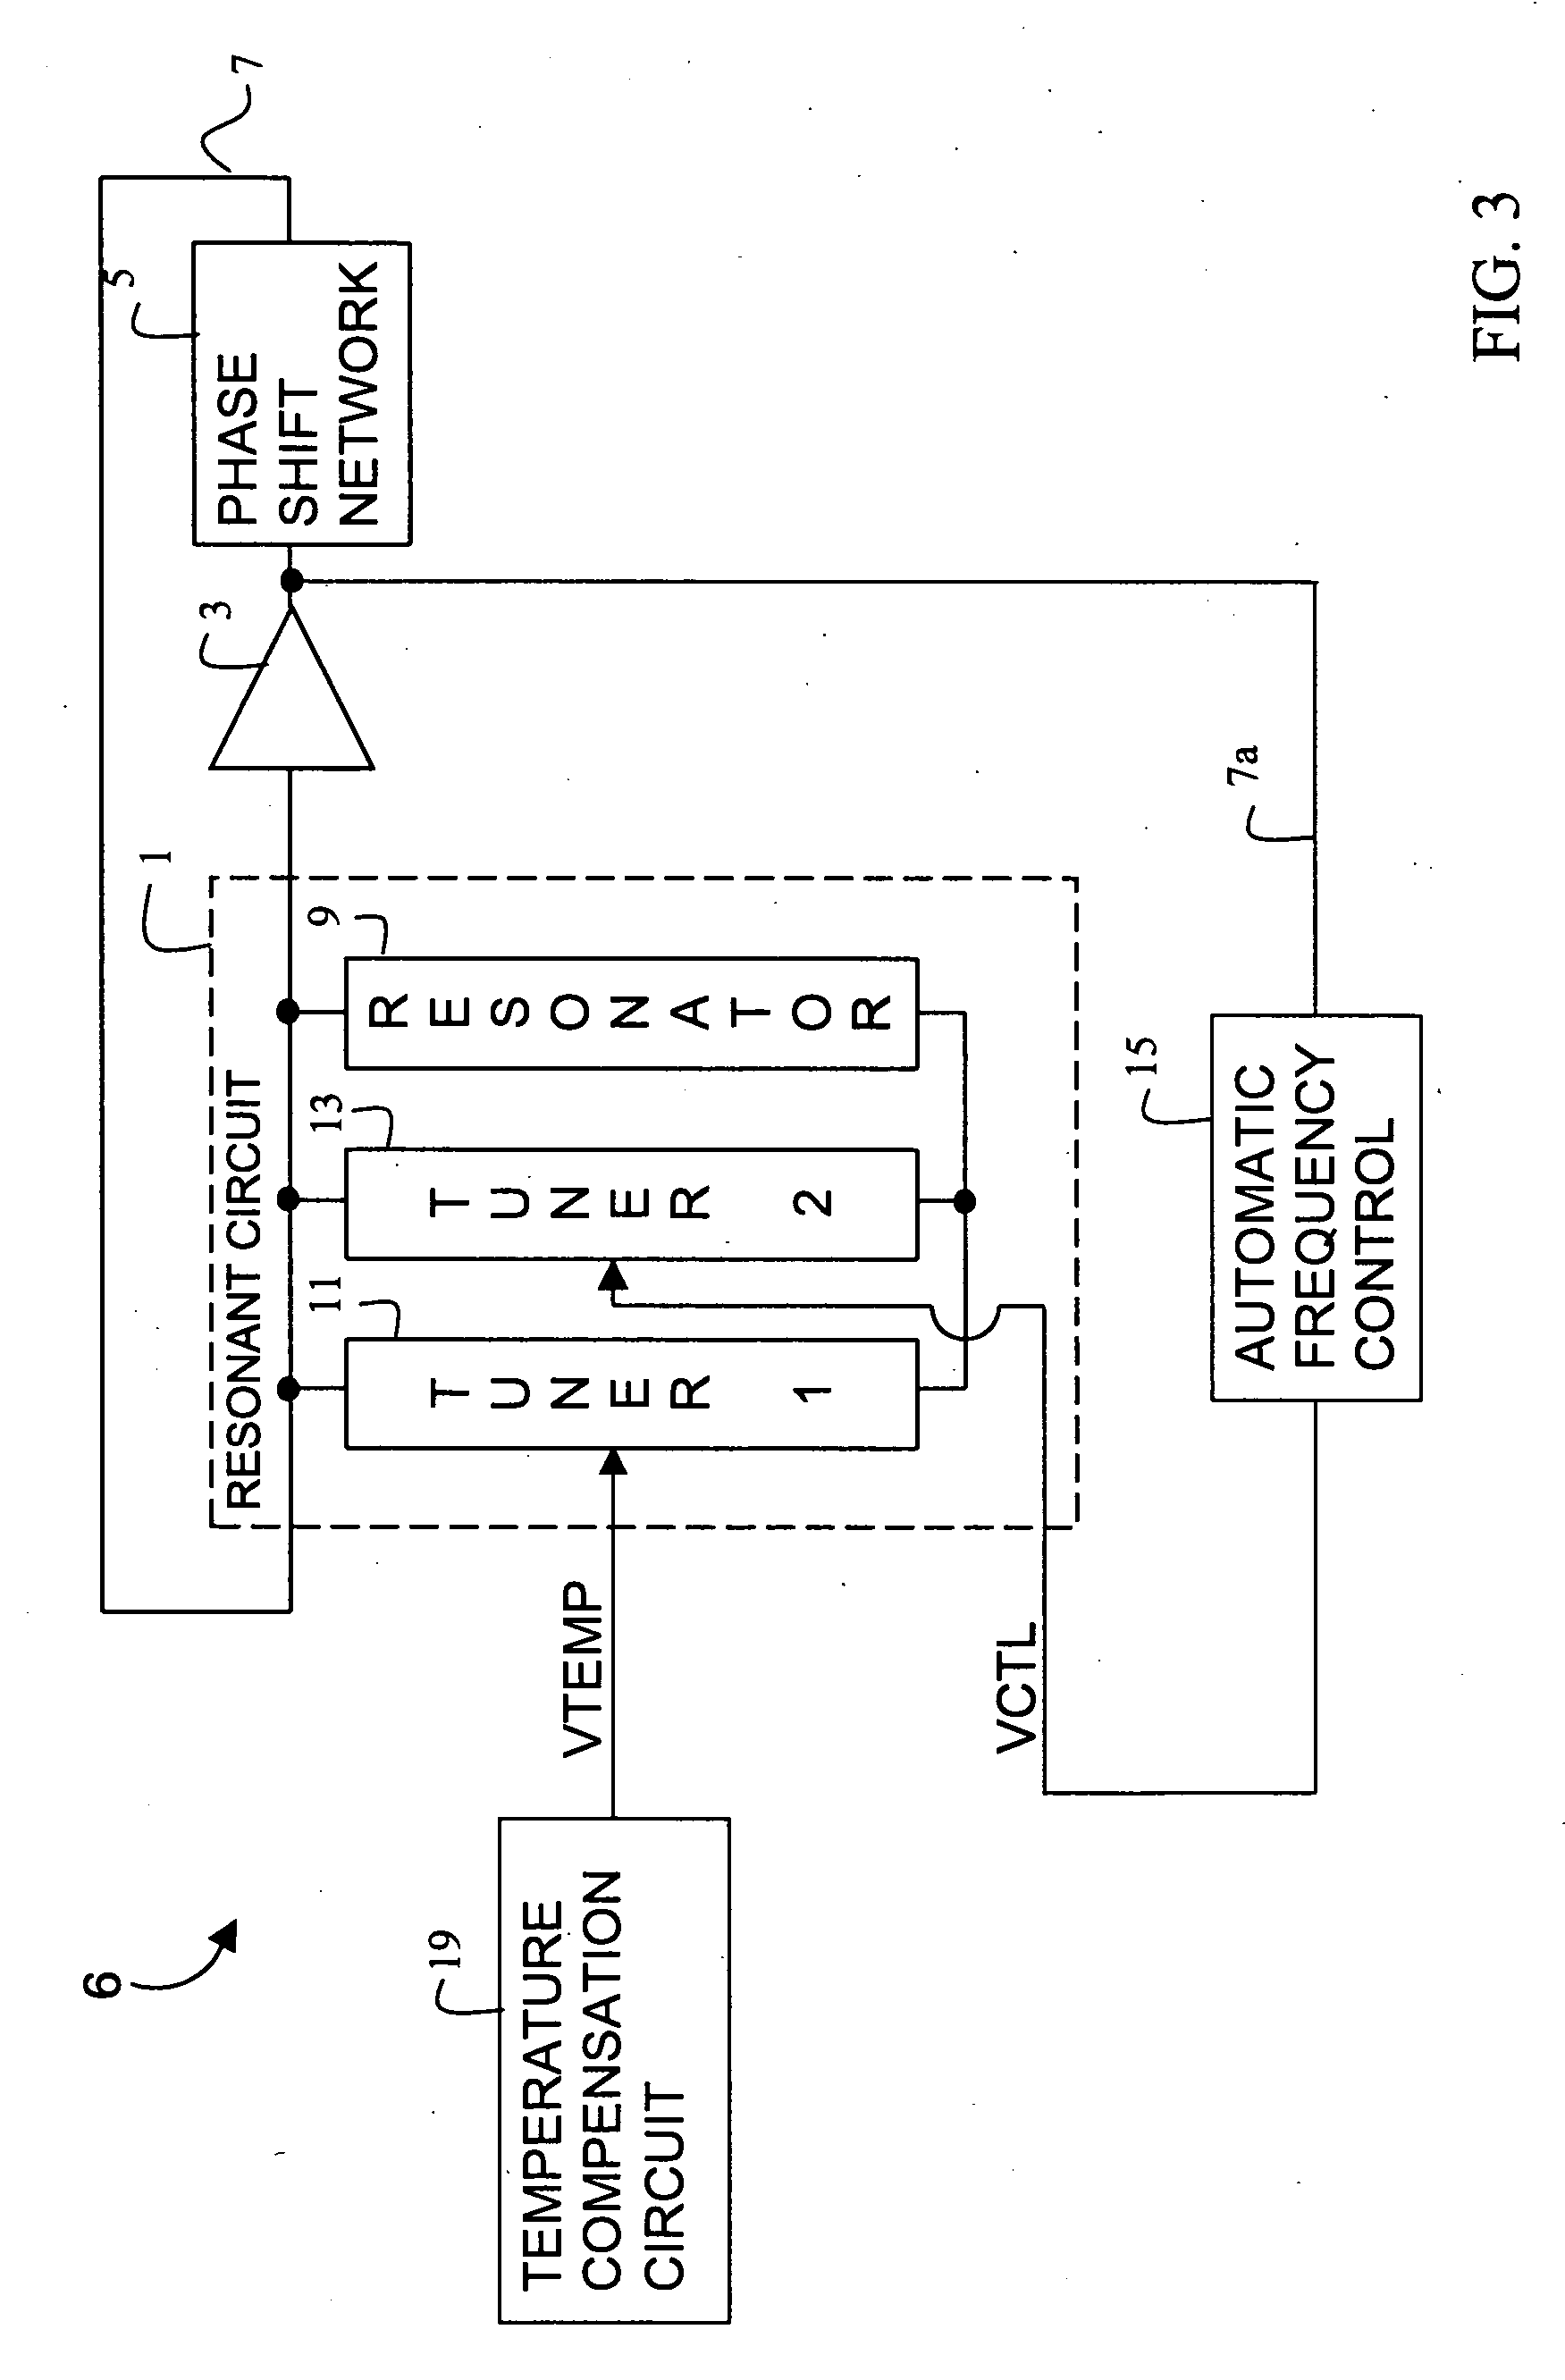 Temperature compensation for a variable frequency oscillator without reducing pull range